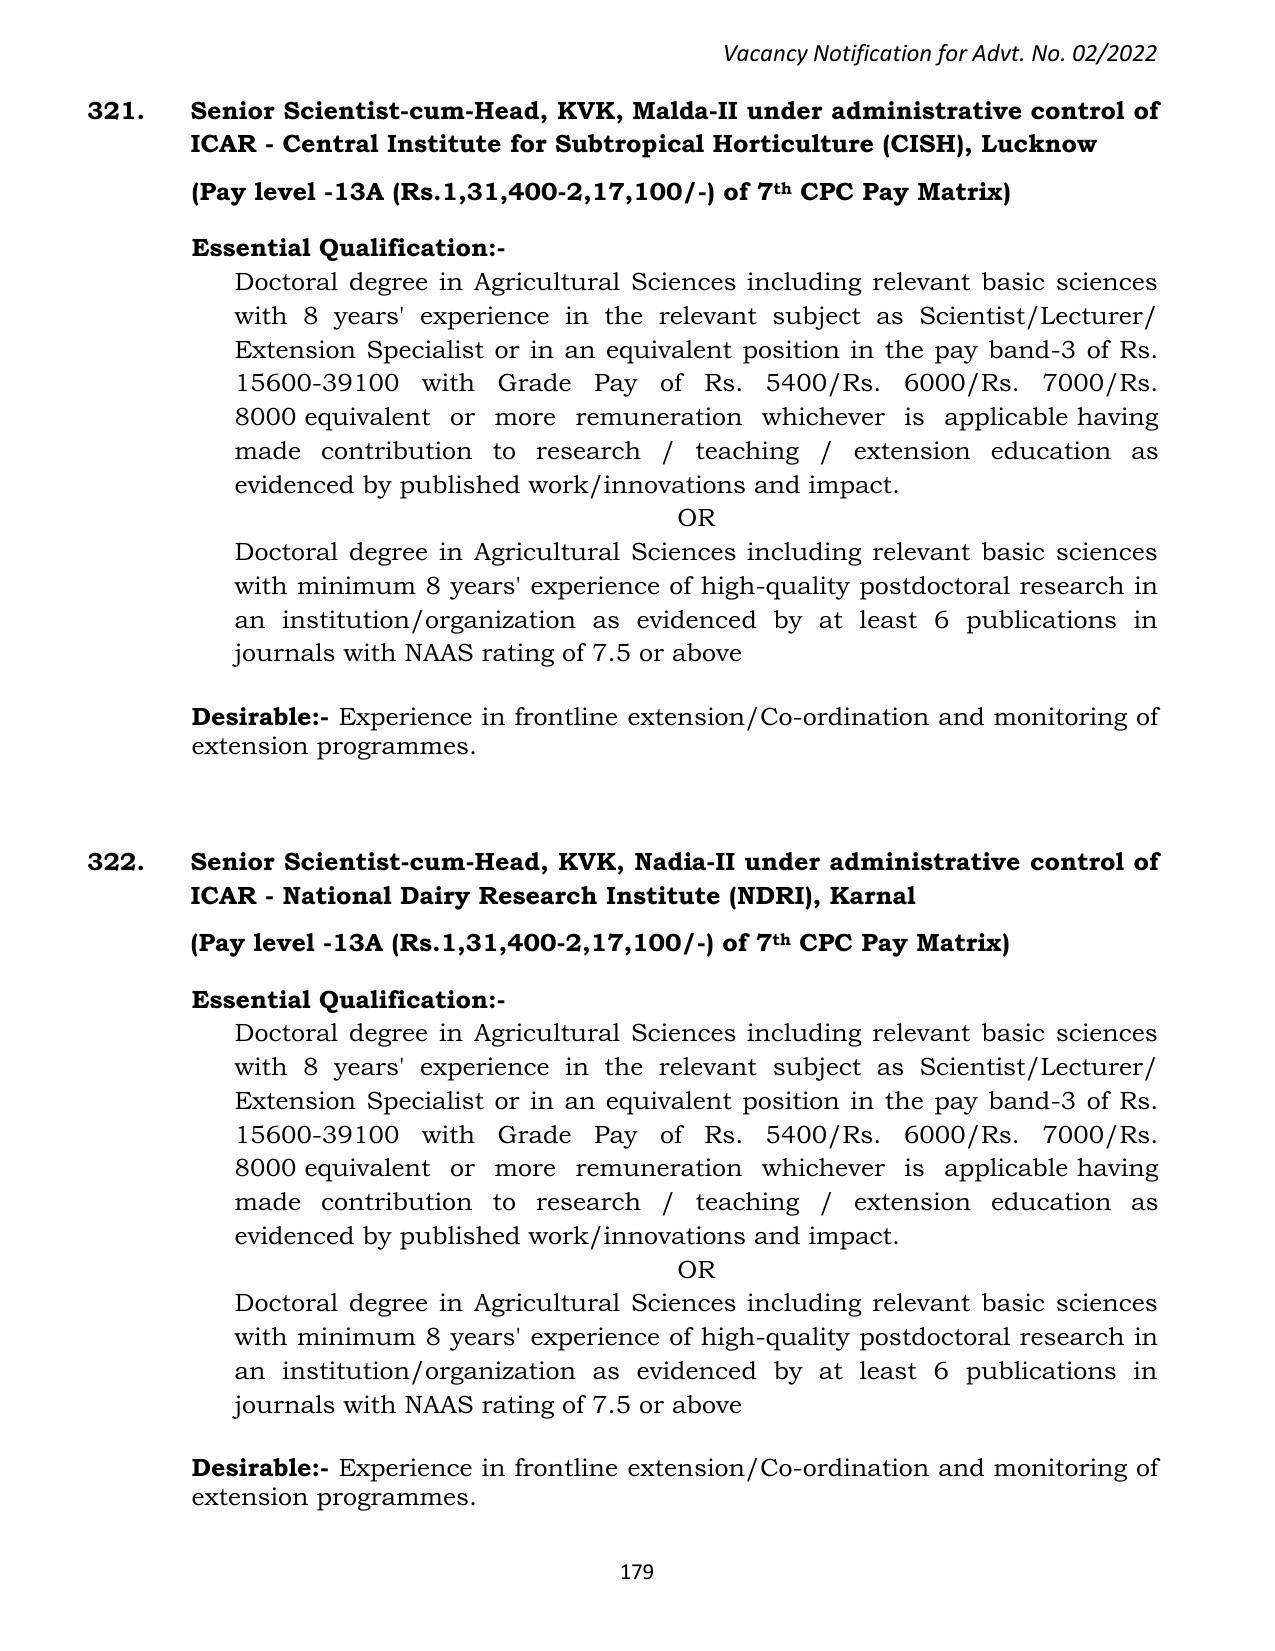 ASRB Non-Research Management Recruitment 2022 - Page 57